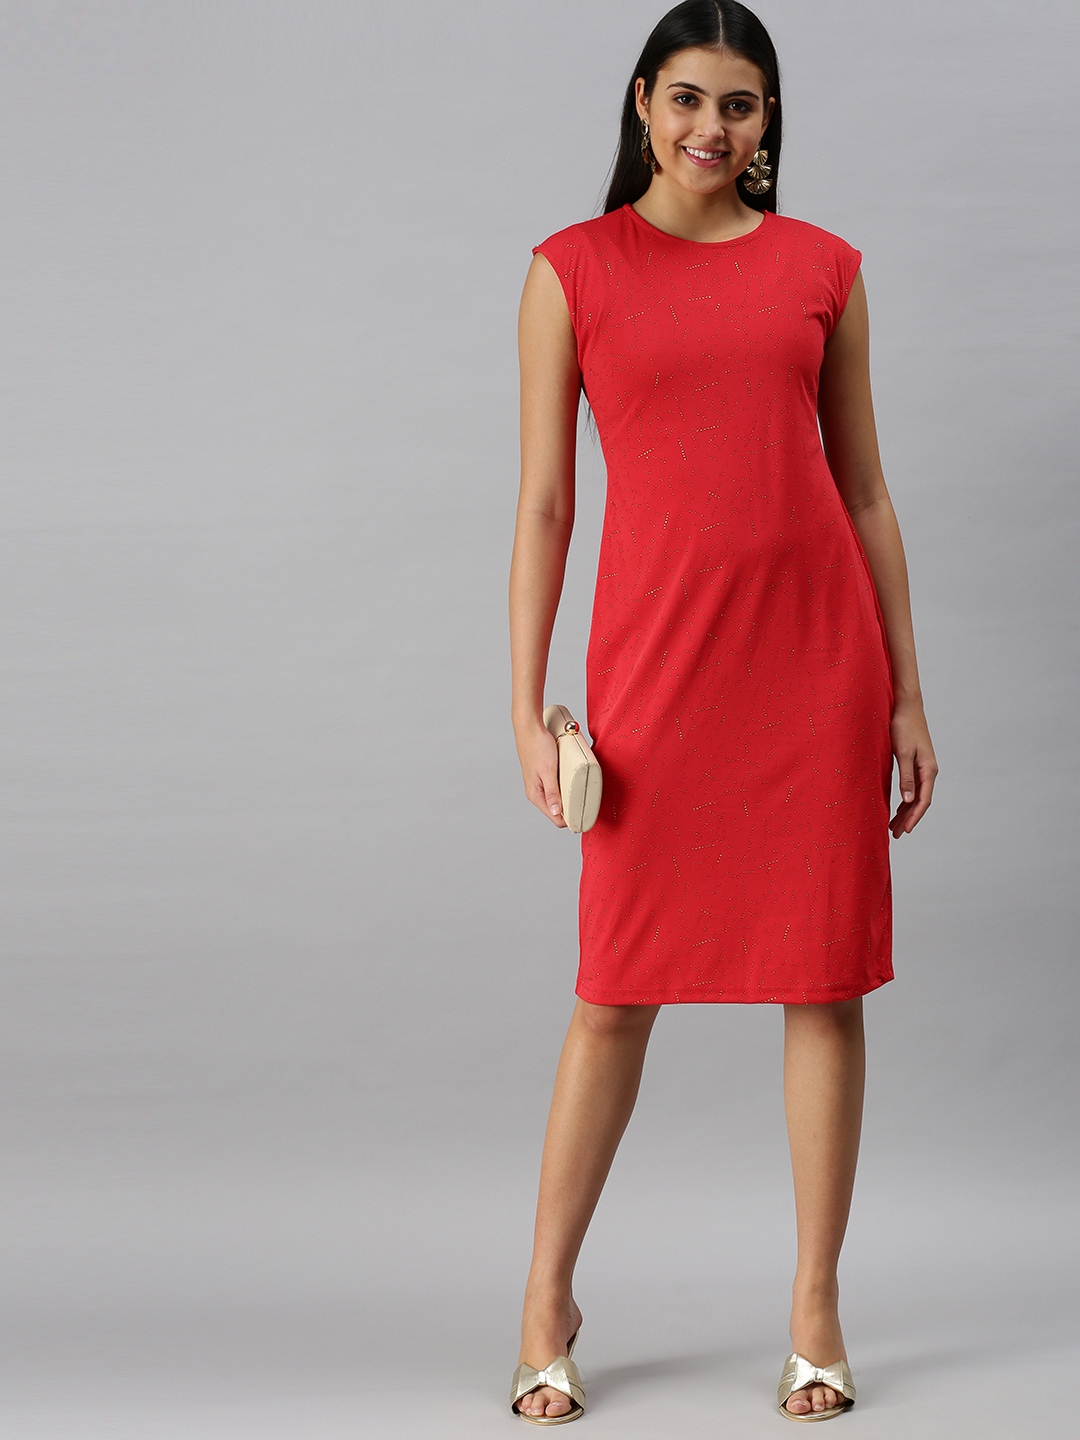 Showoff | SHOWOFF Women Red Solid Round Neck Sleeveless Knee length Sheath Dress 0